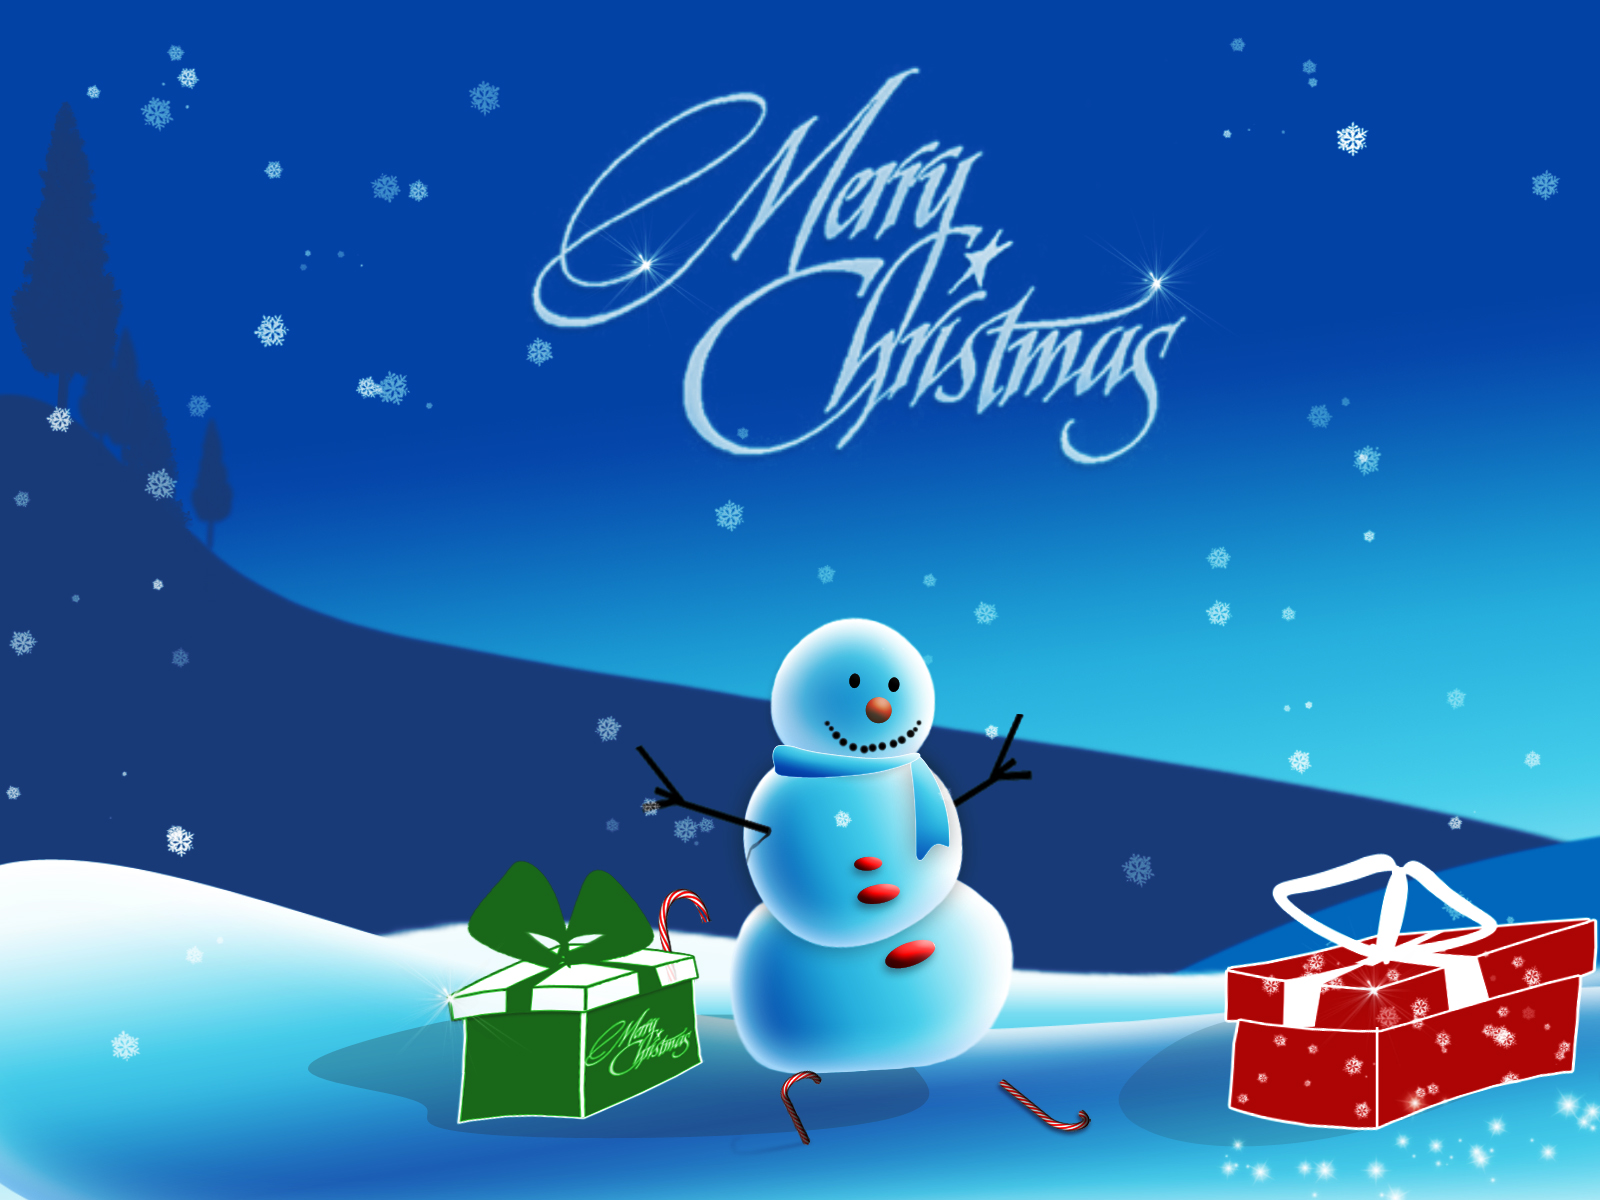 christmas images free download